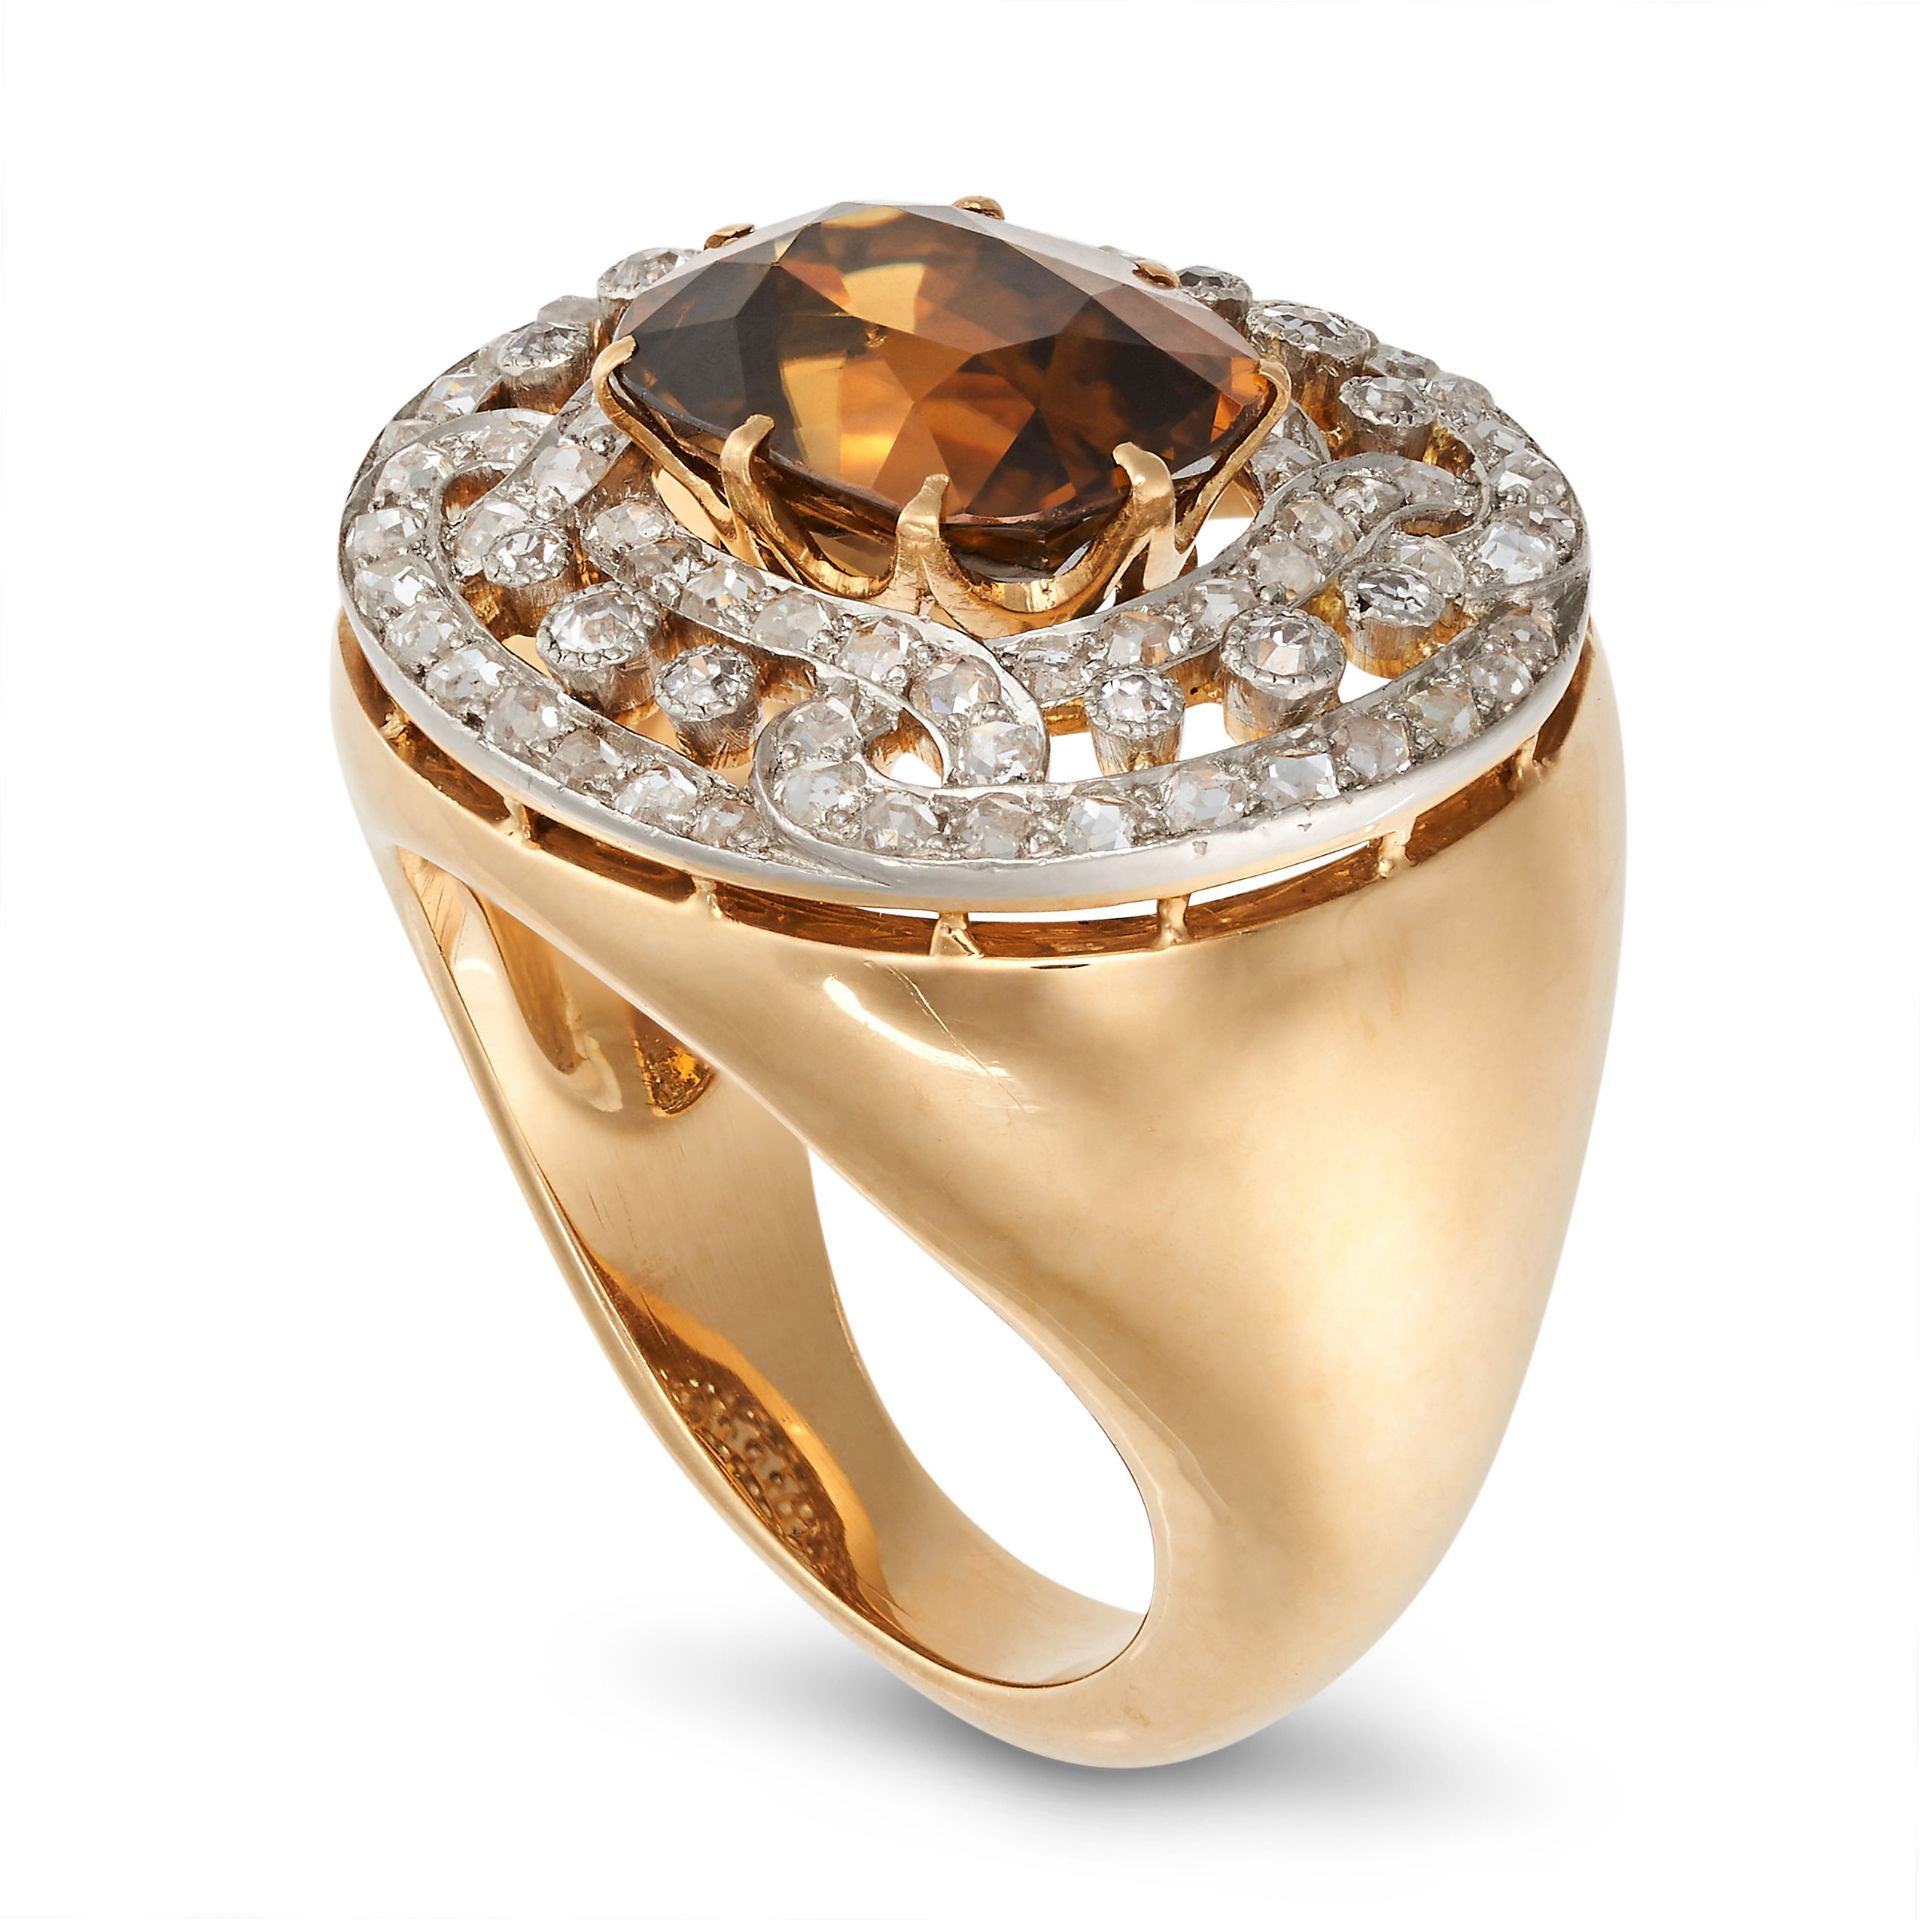 A GOLDEN ZIRCON AND DIAMOND DRESS RING in yellow gold, set with a cushion cut golden zircon in an... - Image 2 of 2